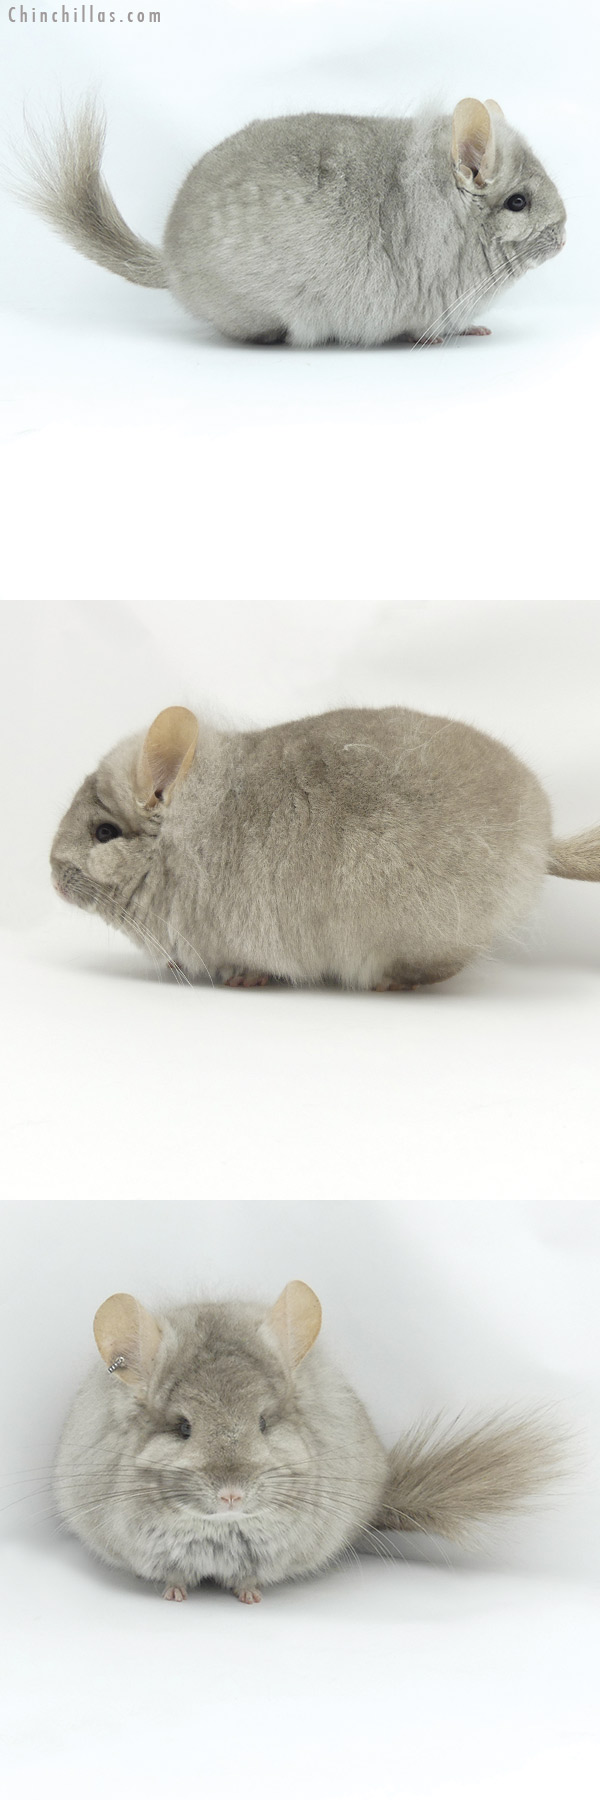 Chinchilla or related item offered for sale or export on Chinchillas.com - 20014 Blocky Beige  Royal Persian Angora Female Chinchilla